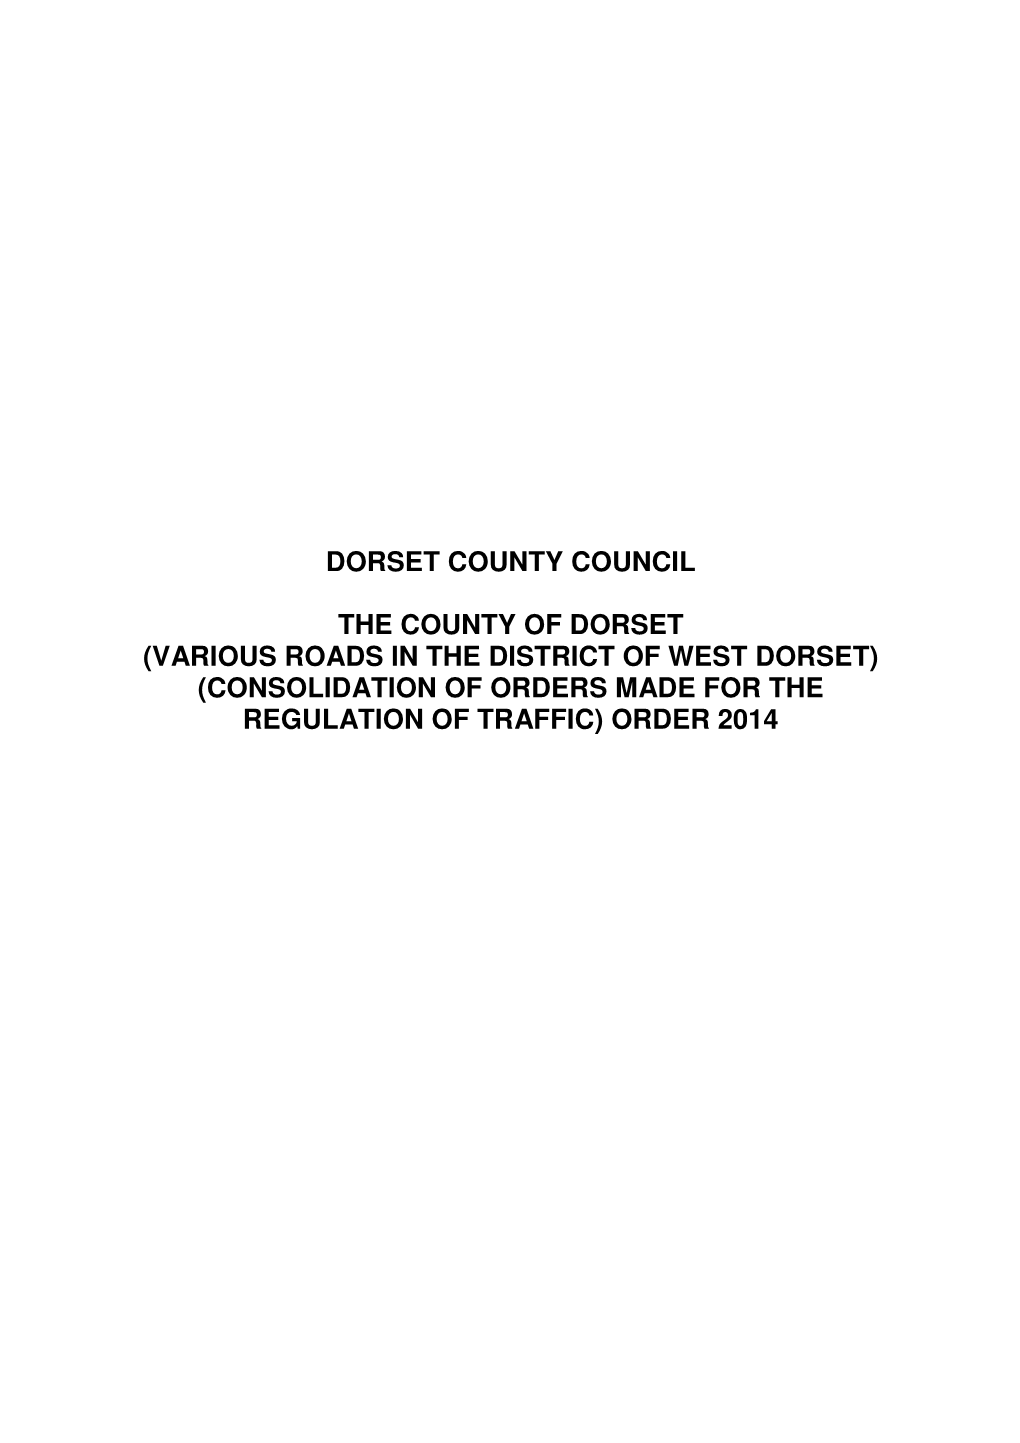 Various Roads in the District of West Dorset) (Consolidation of Orders Made for the Regulation of Traffic) Order 2014